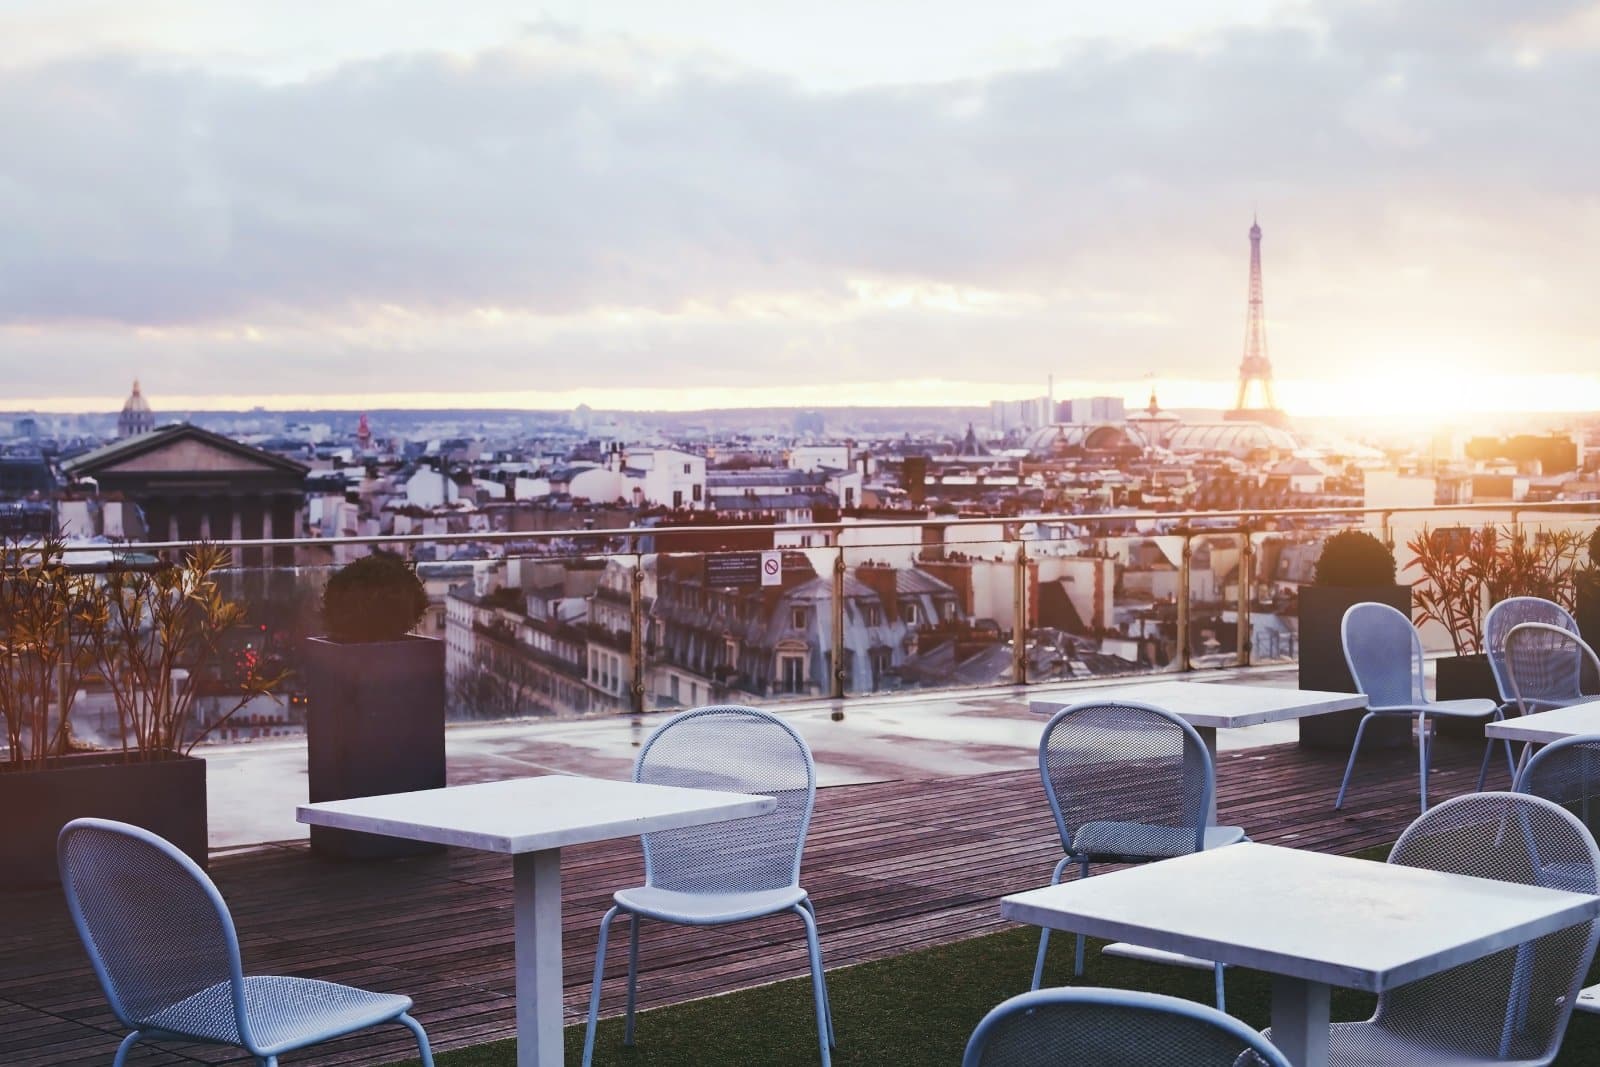 Image Credit: Shutterstock / Song_about_summer <p>A sea of zinc rooftops against the city’s skyline from the heights of Notre Dame or Montparnasse Tower captures the essence of Parisian charm.</p>